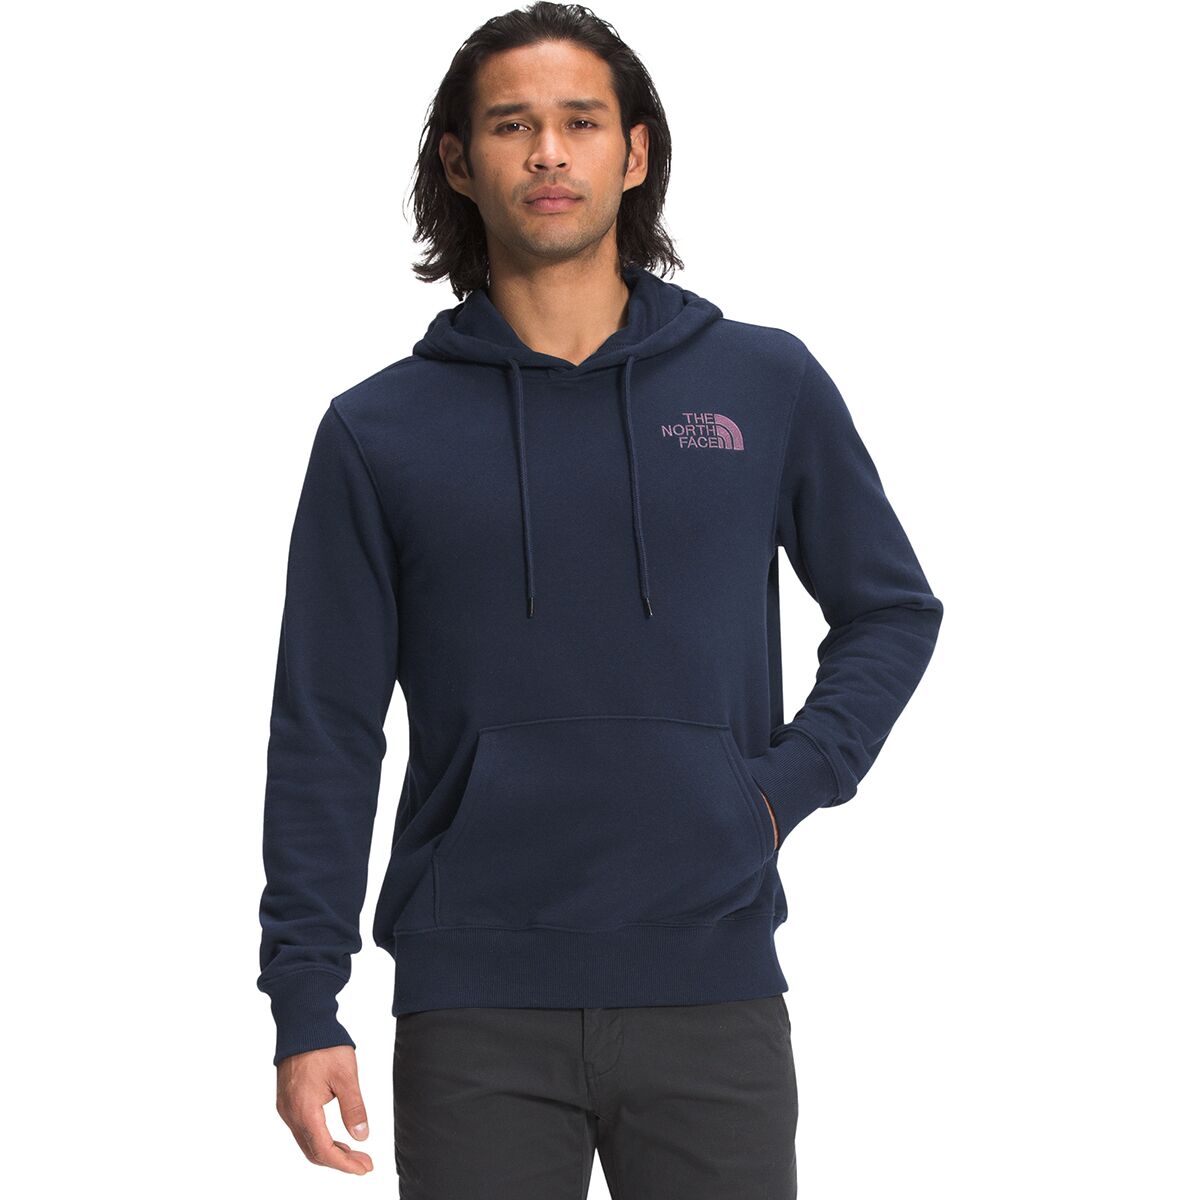 The North Face Walls Are Meant For Climbing Pullover Hoodie - Men's